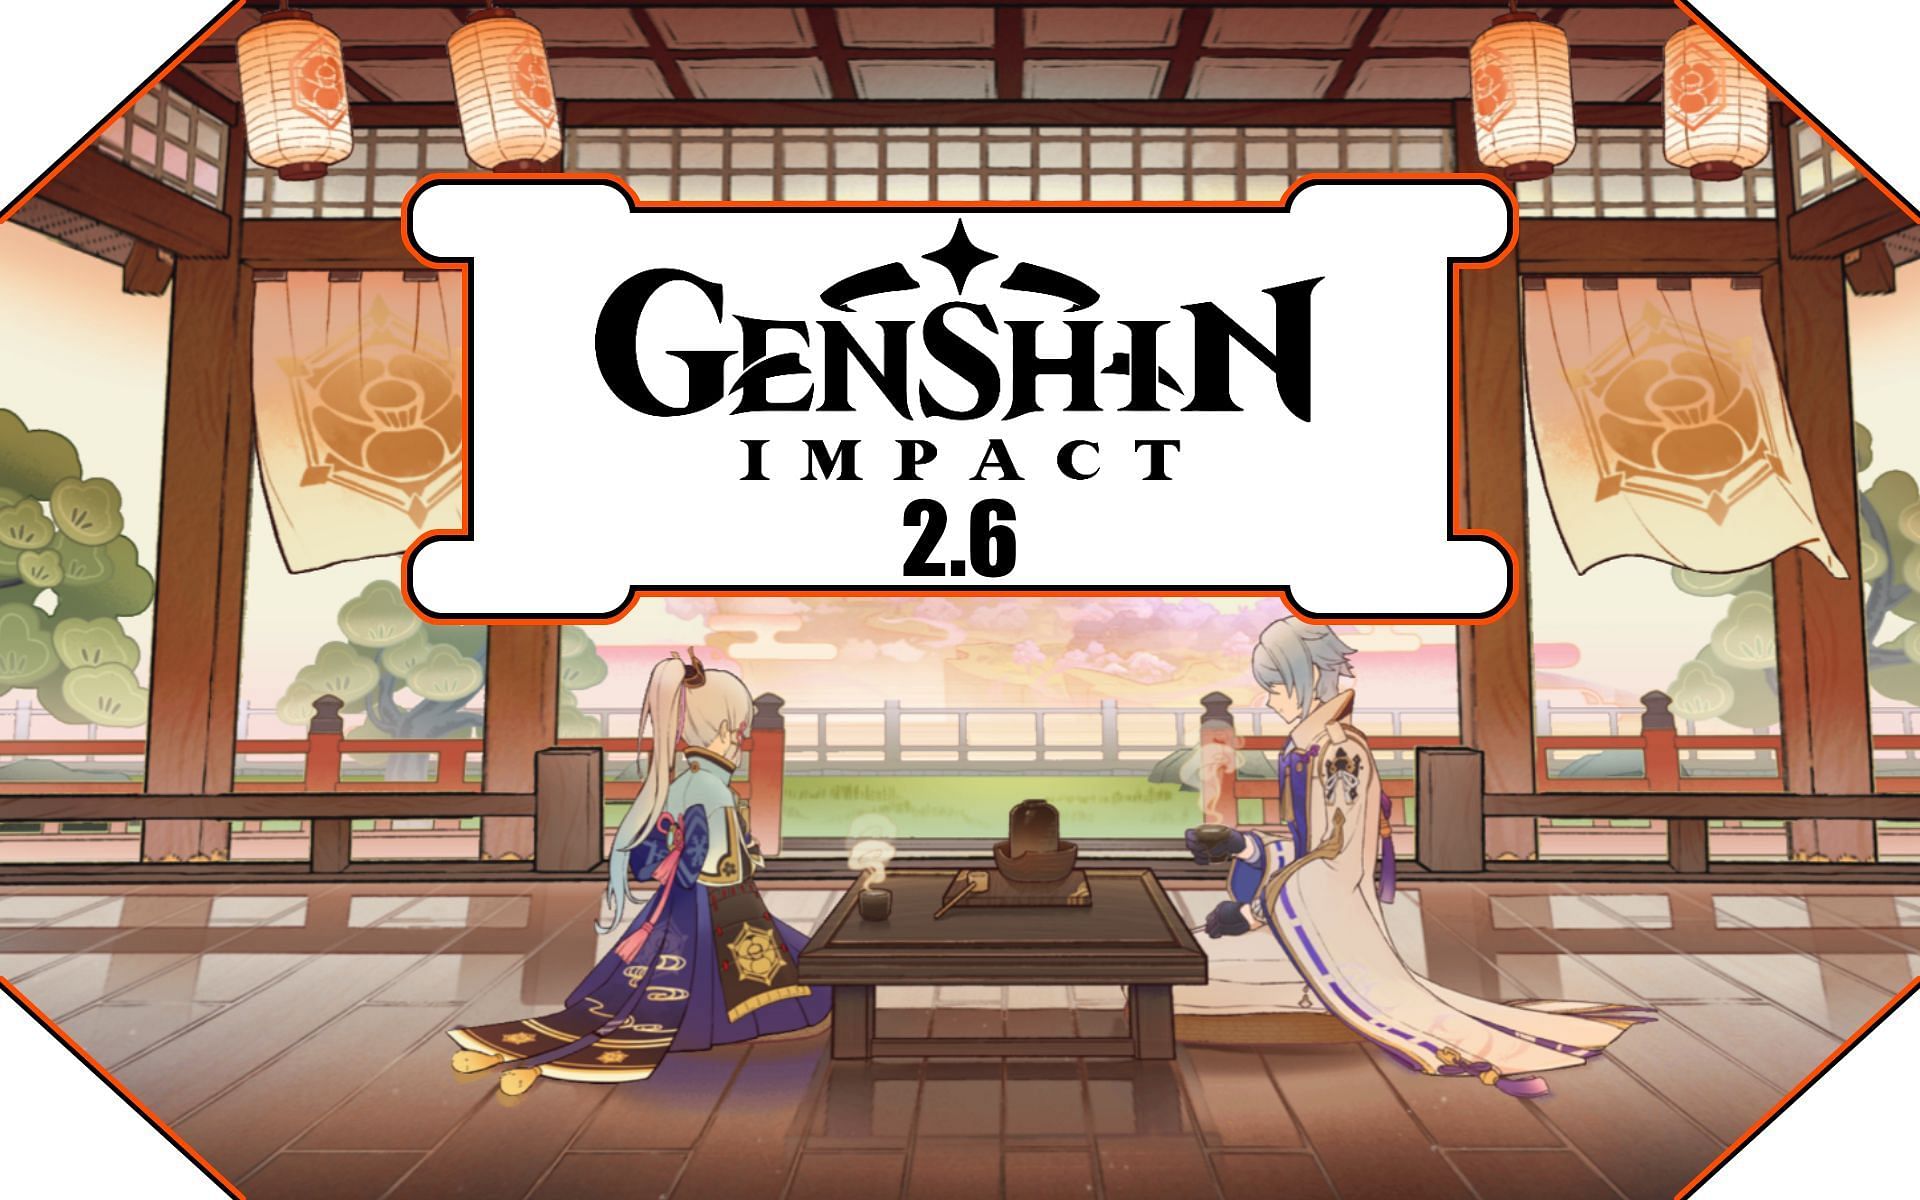 Genshin Impact 2.6 will come out on March 29/March 30, depending on where the player lives (Image via miHoYo)